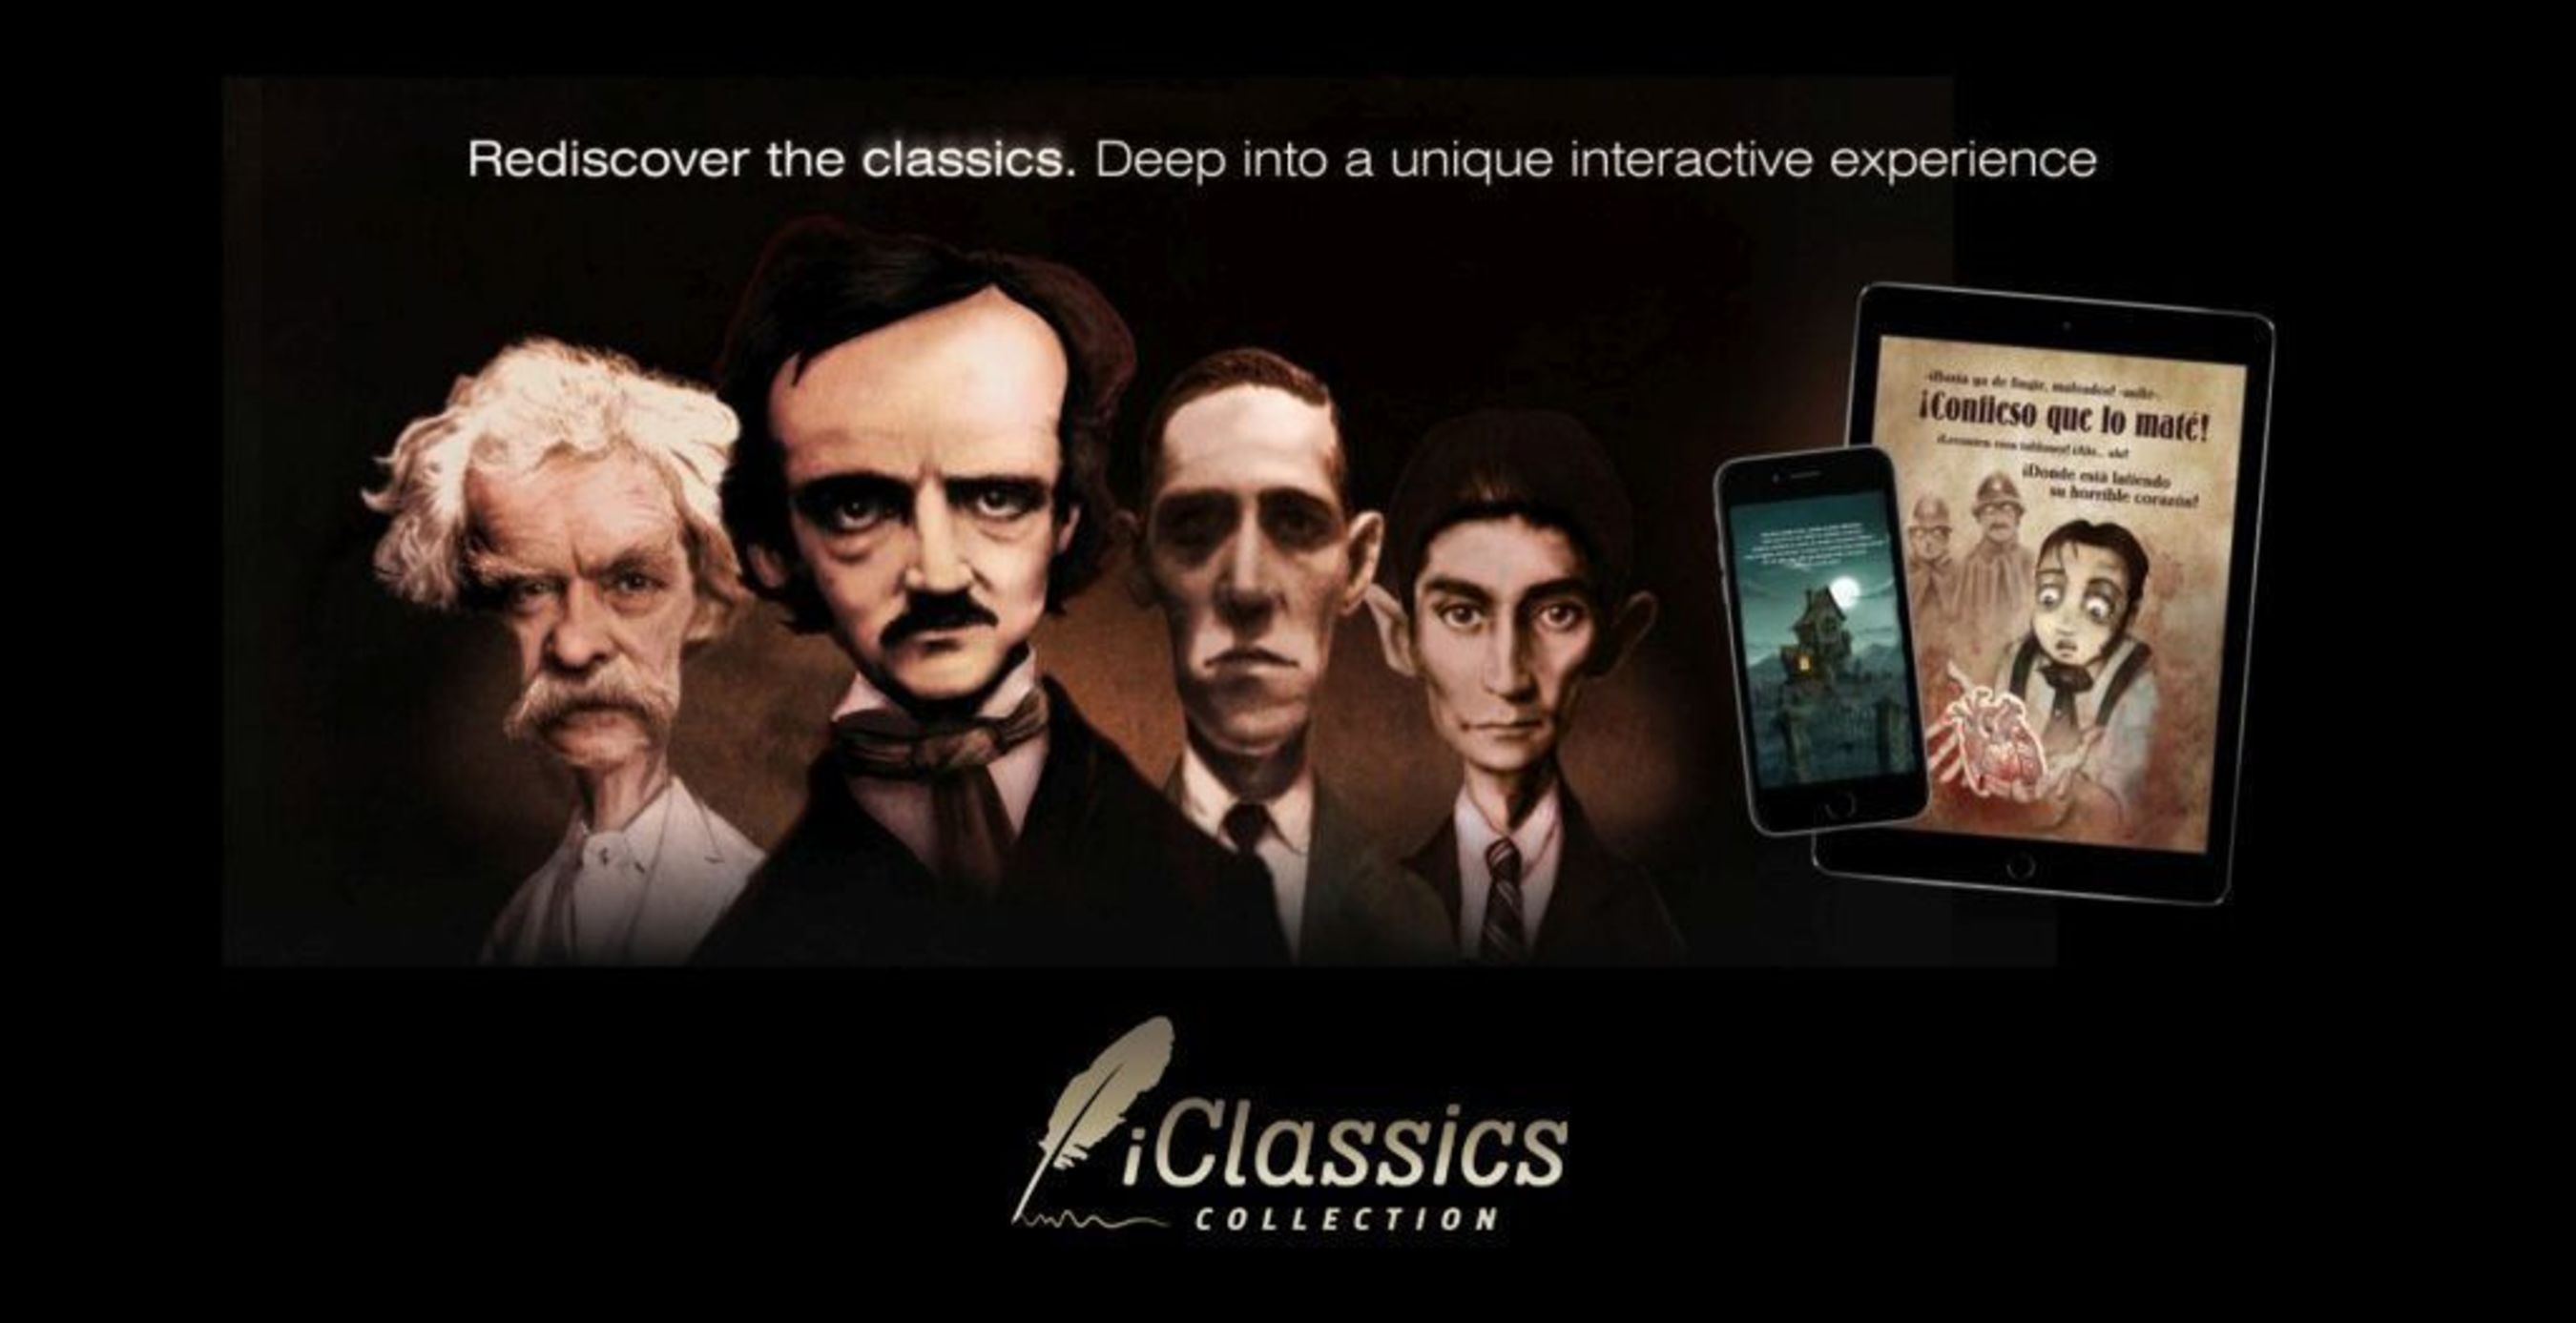 iClassics collection brings classic literature alive for new generations through entertainment and the use of cutting edge technologies. (PRNewsFoto/iClassics Productions SL)